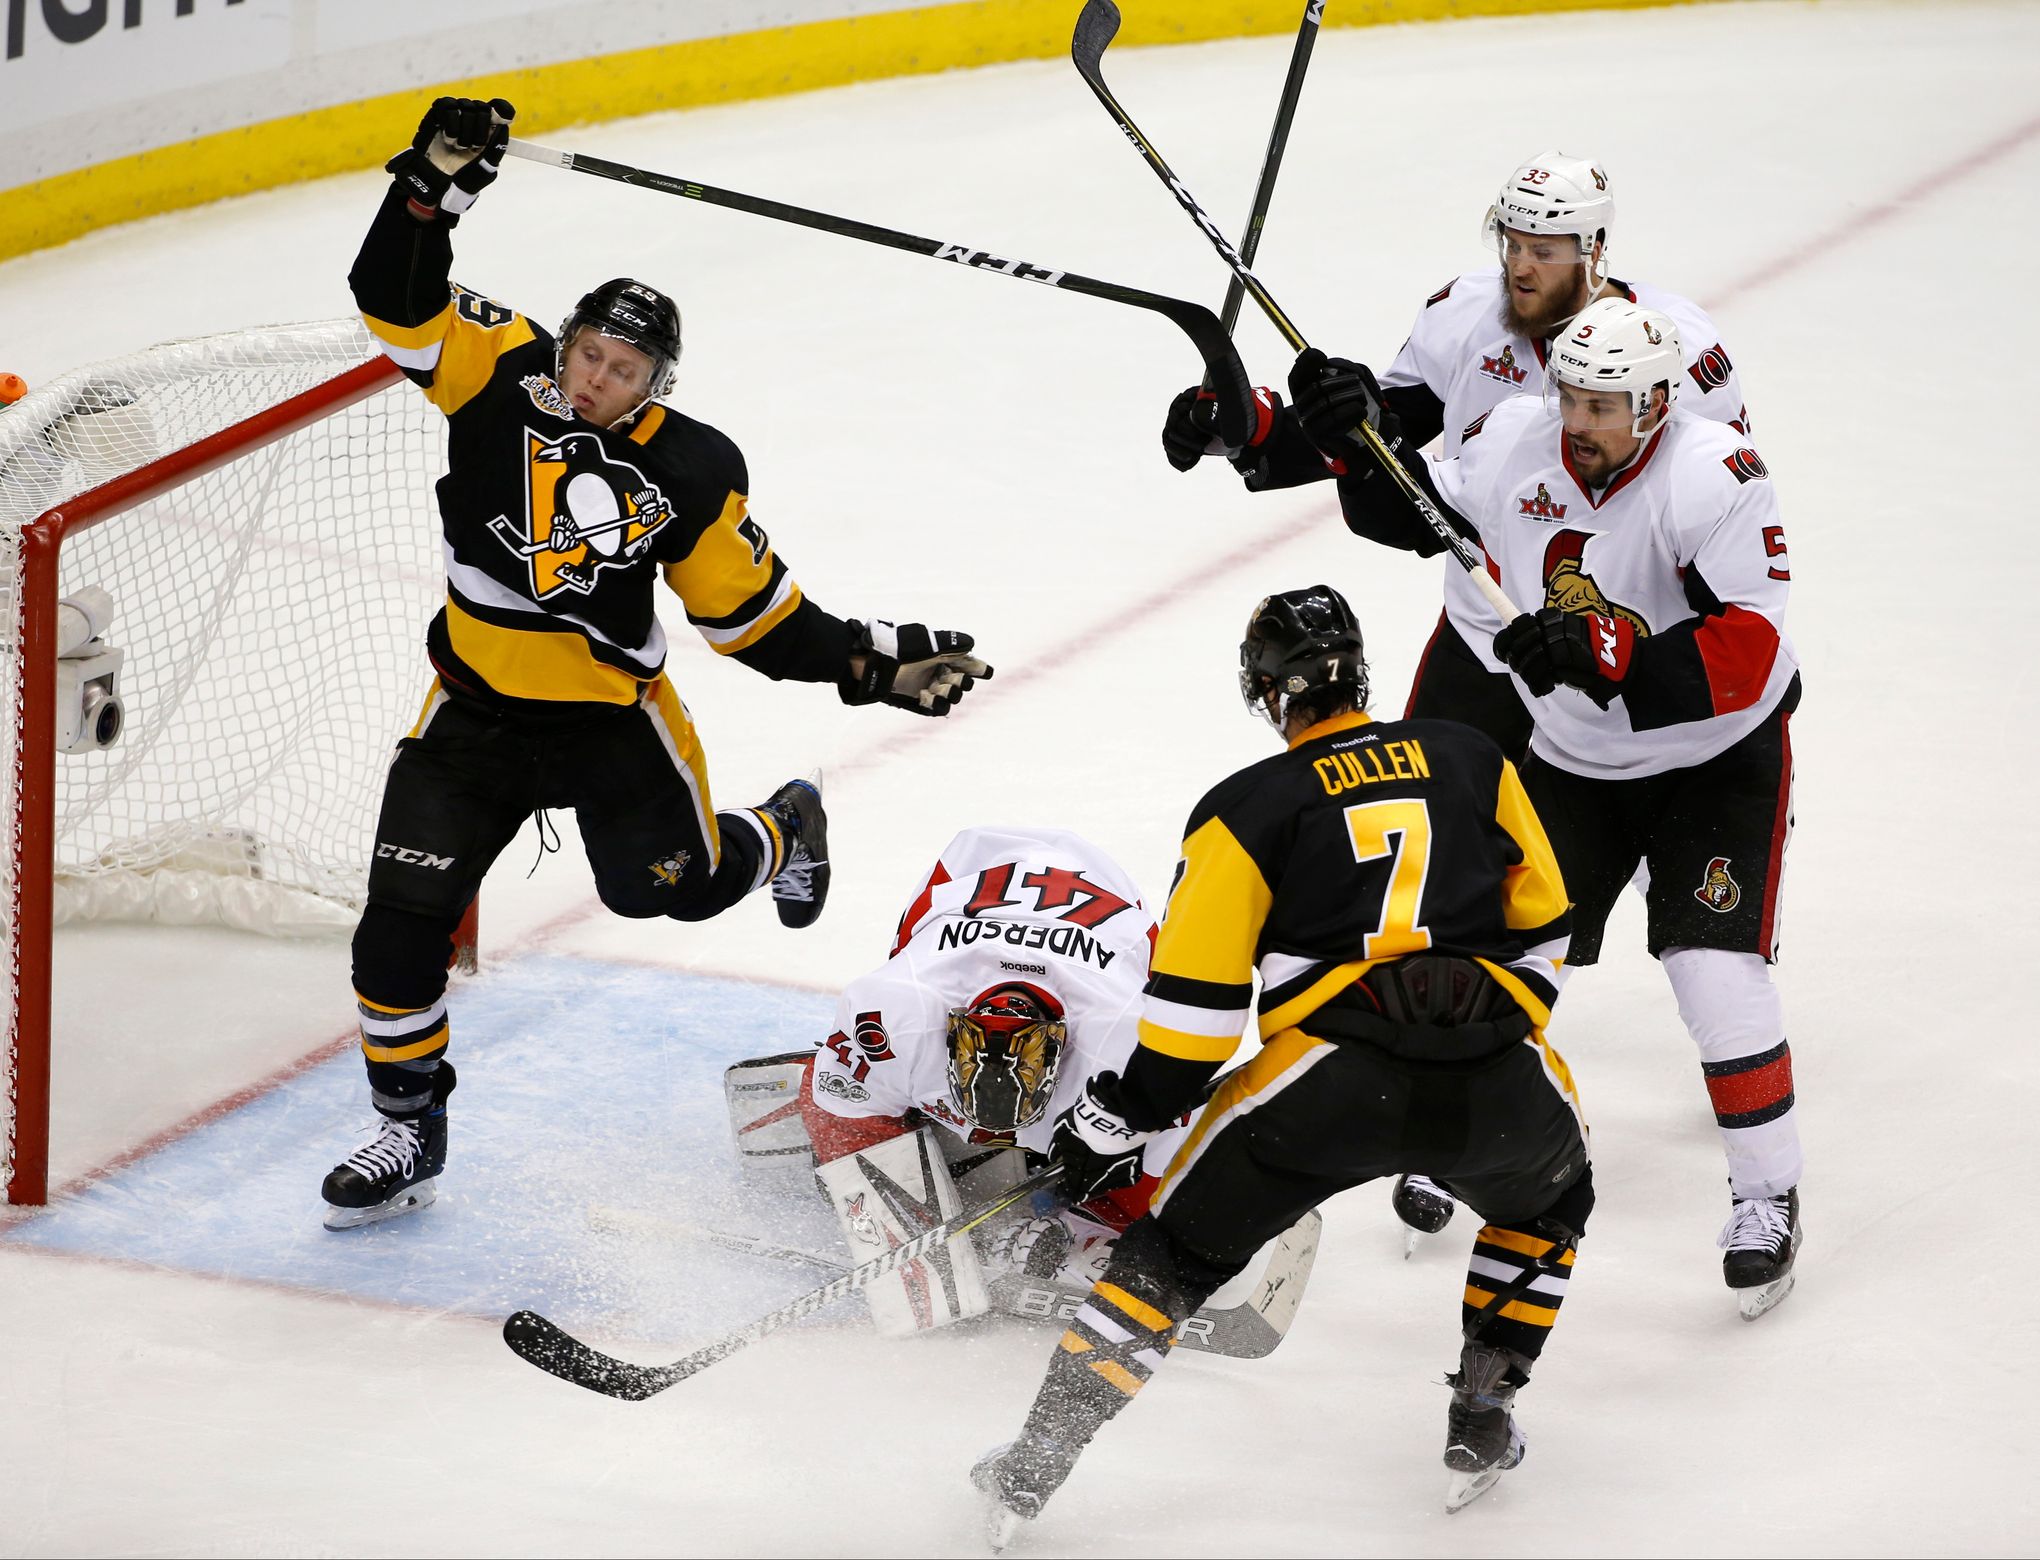 Penguins ride maturity, resilience back to Stanley Cup Final